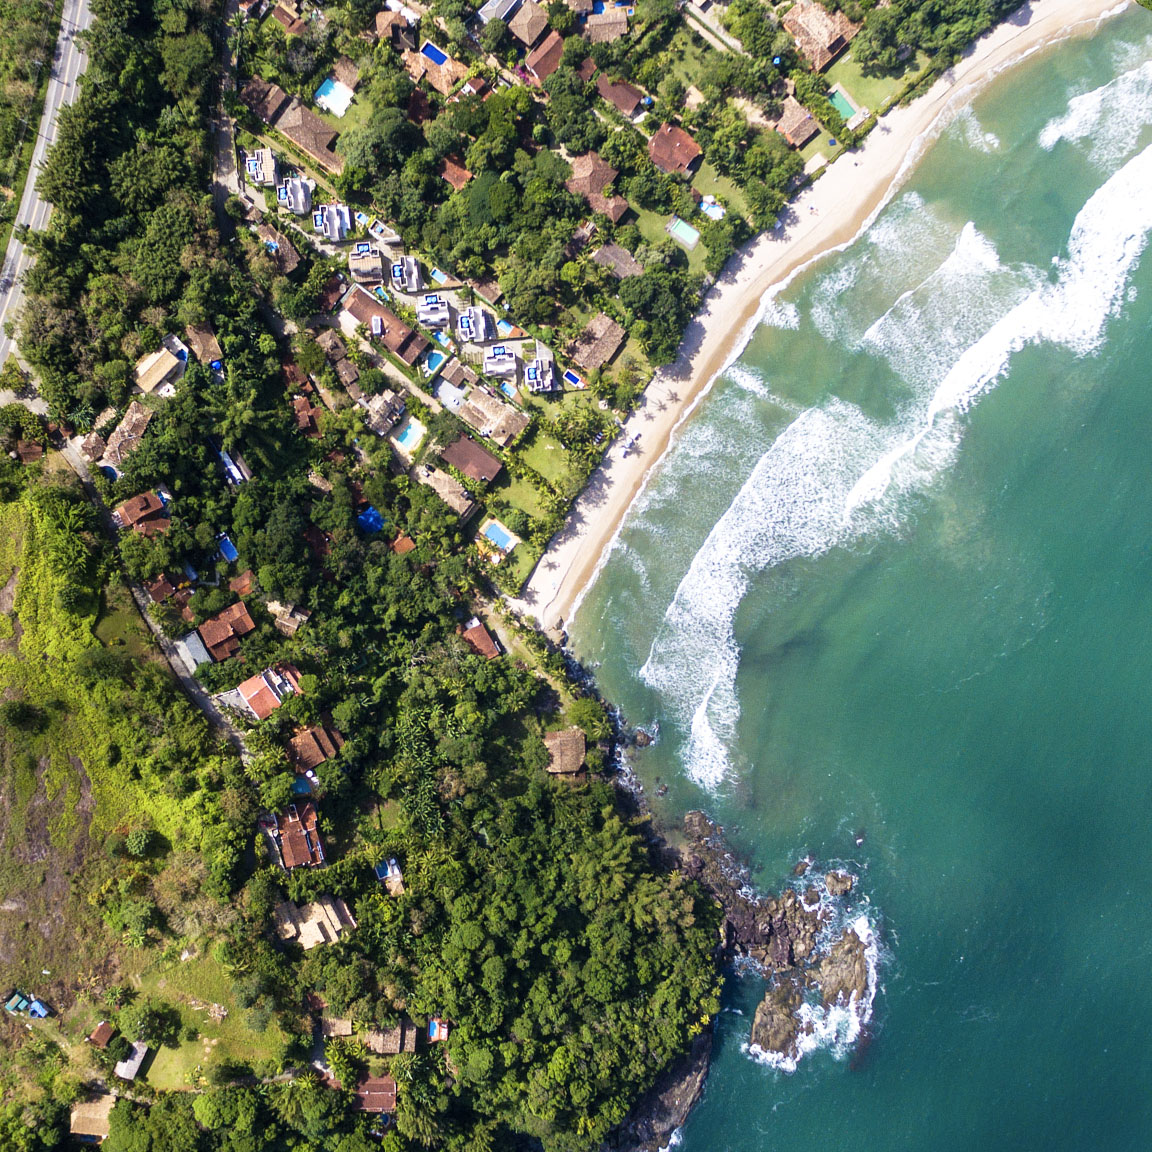 Aerial image of buildings, homes, and green trees along a coastline and blue ocean